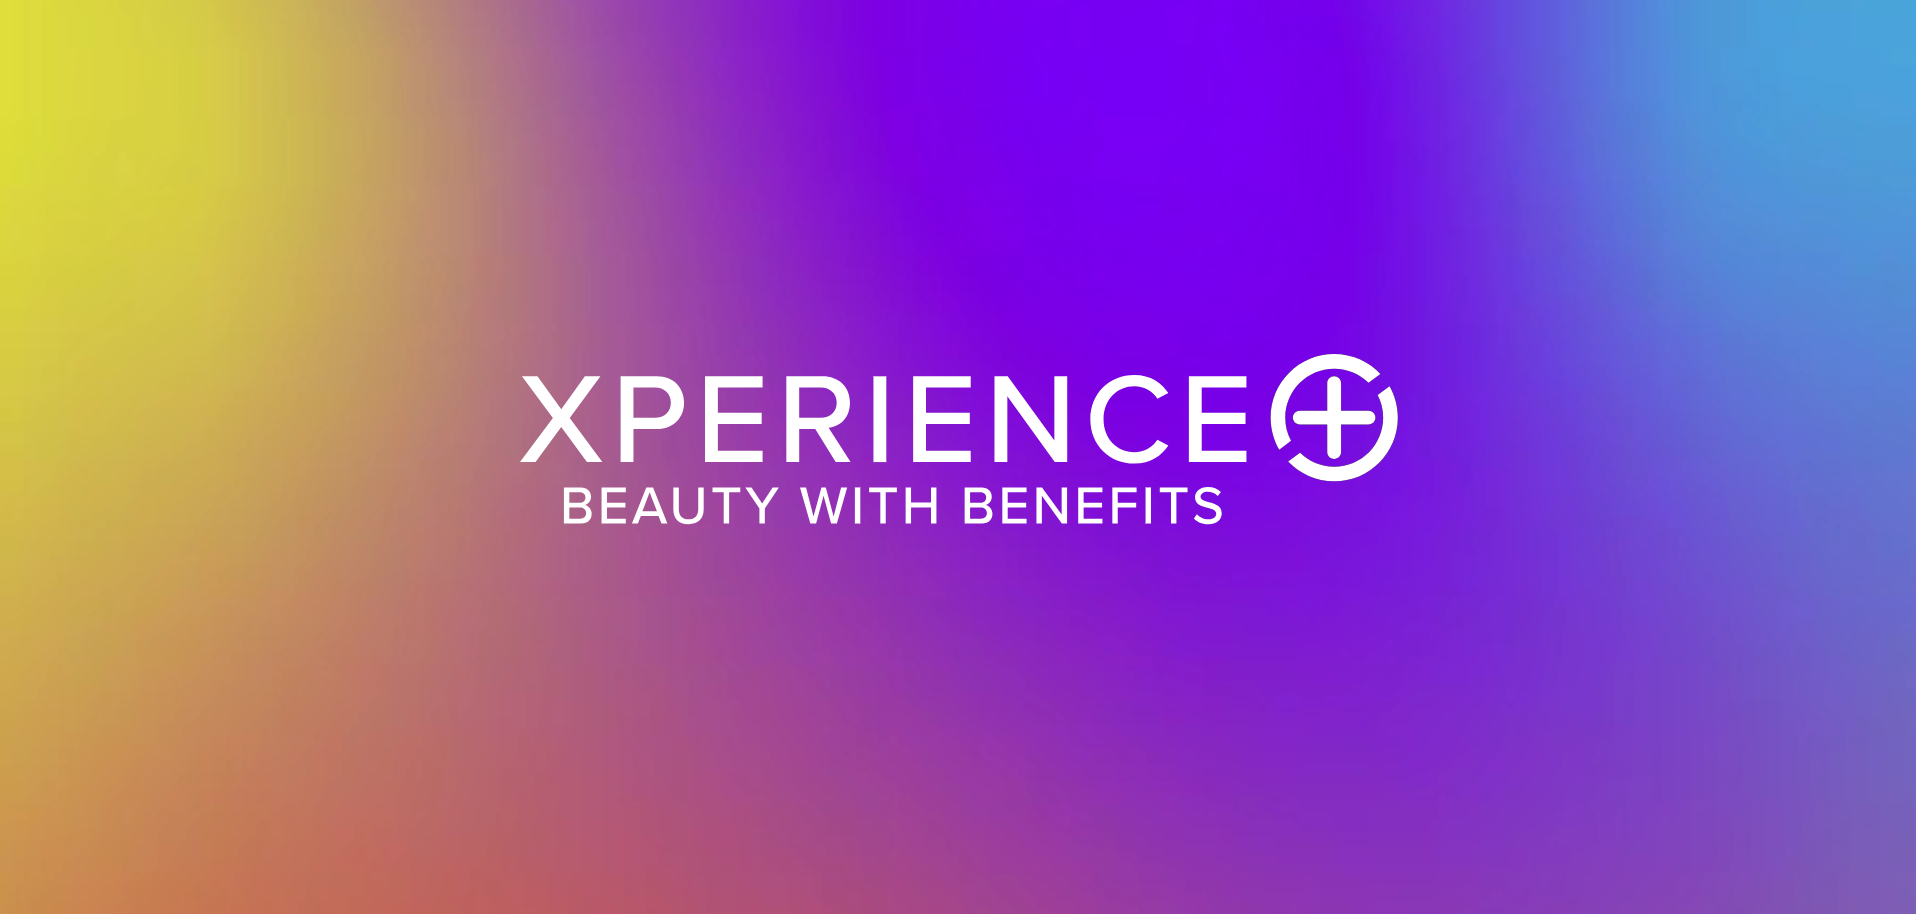 Xperience+ Beauty with Benefits Text over rainbow colored background